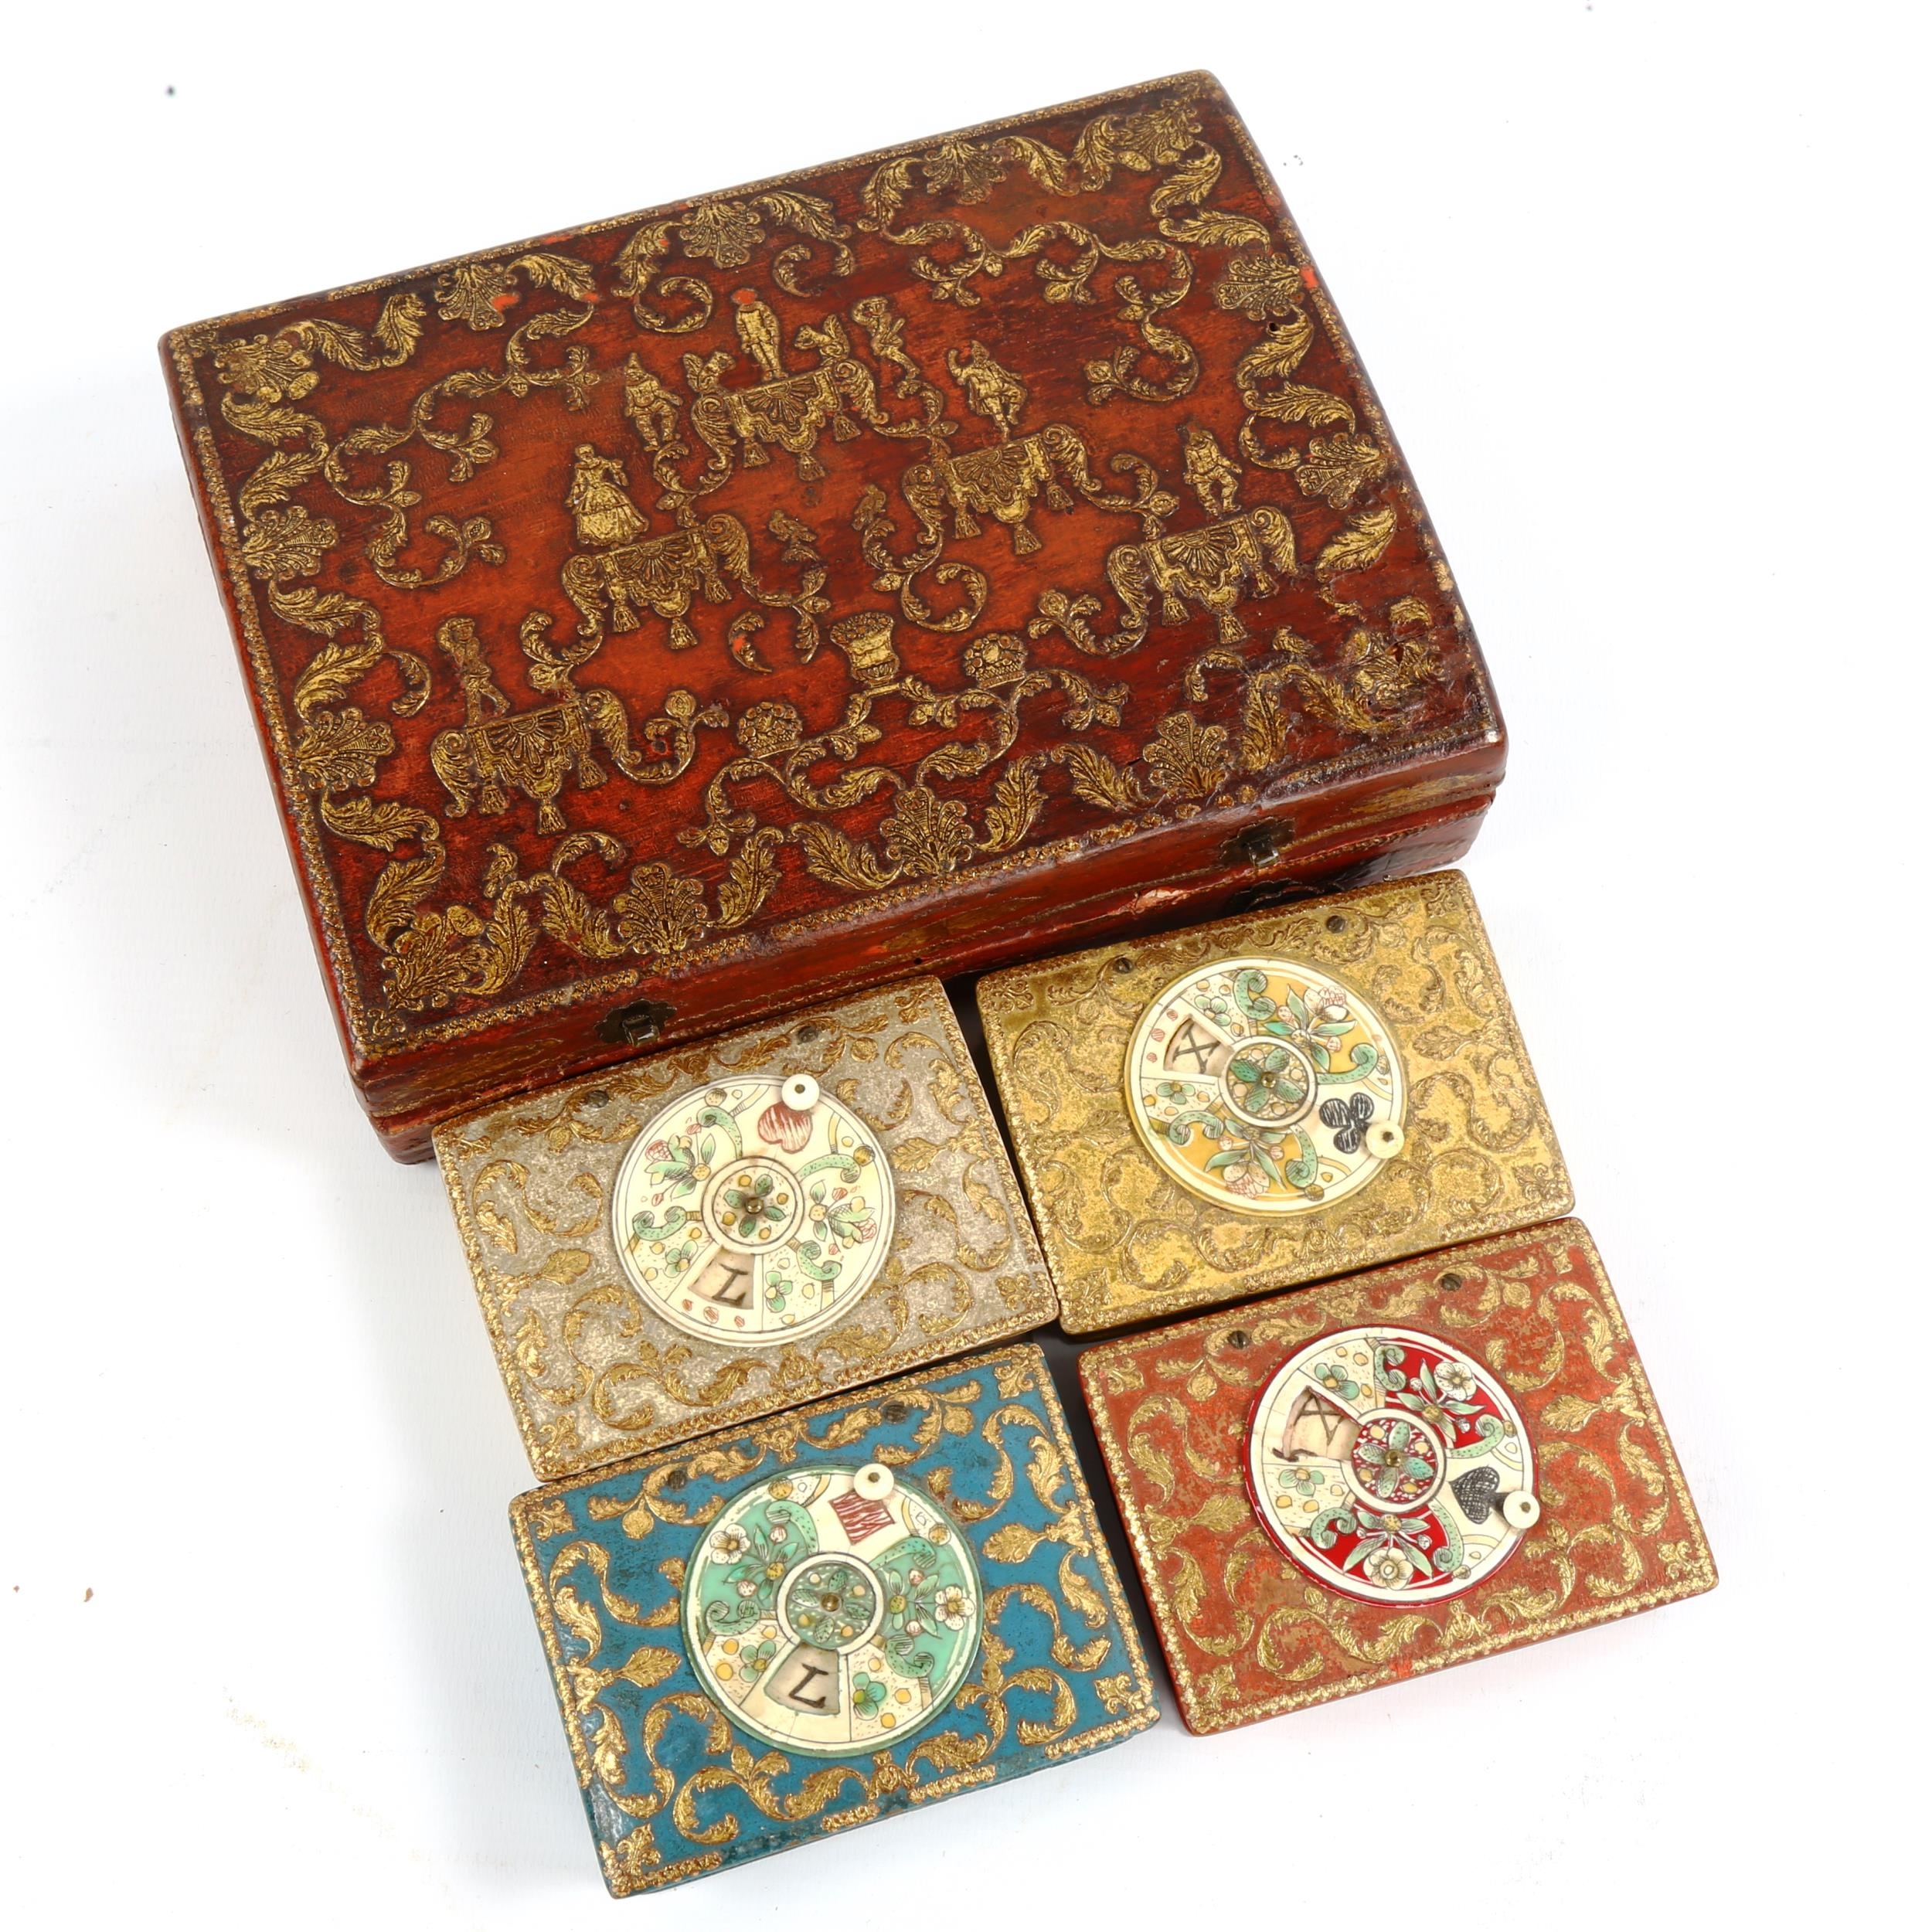 MARIVAL LE JEUNE - 18th century games box, comprising 4 parcel gilded rectangular boxes with